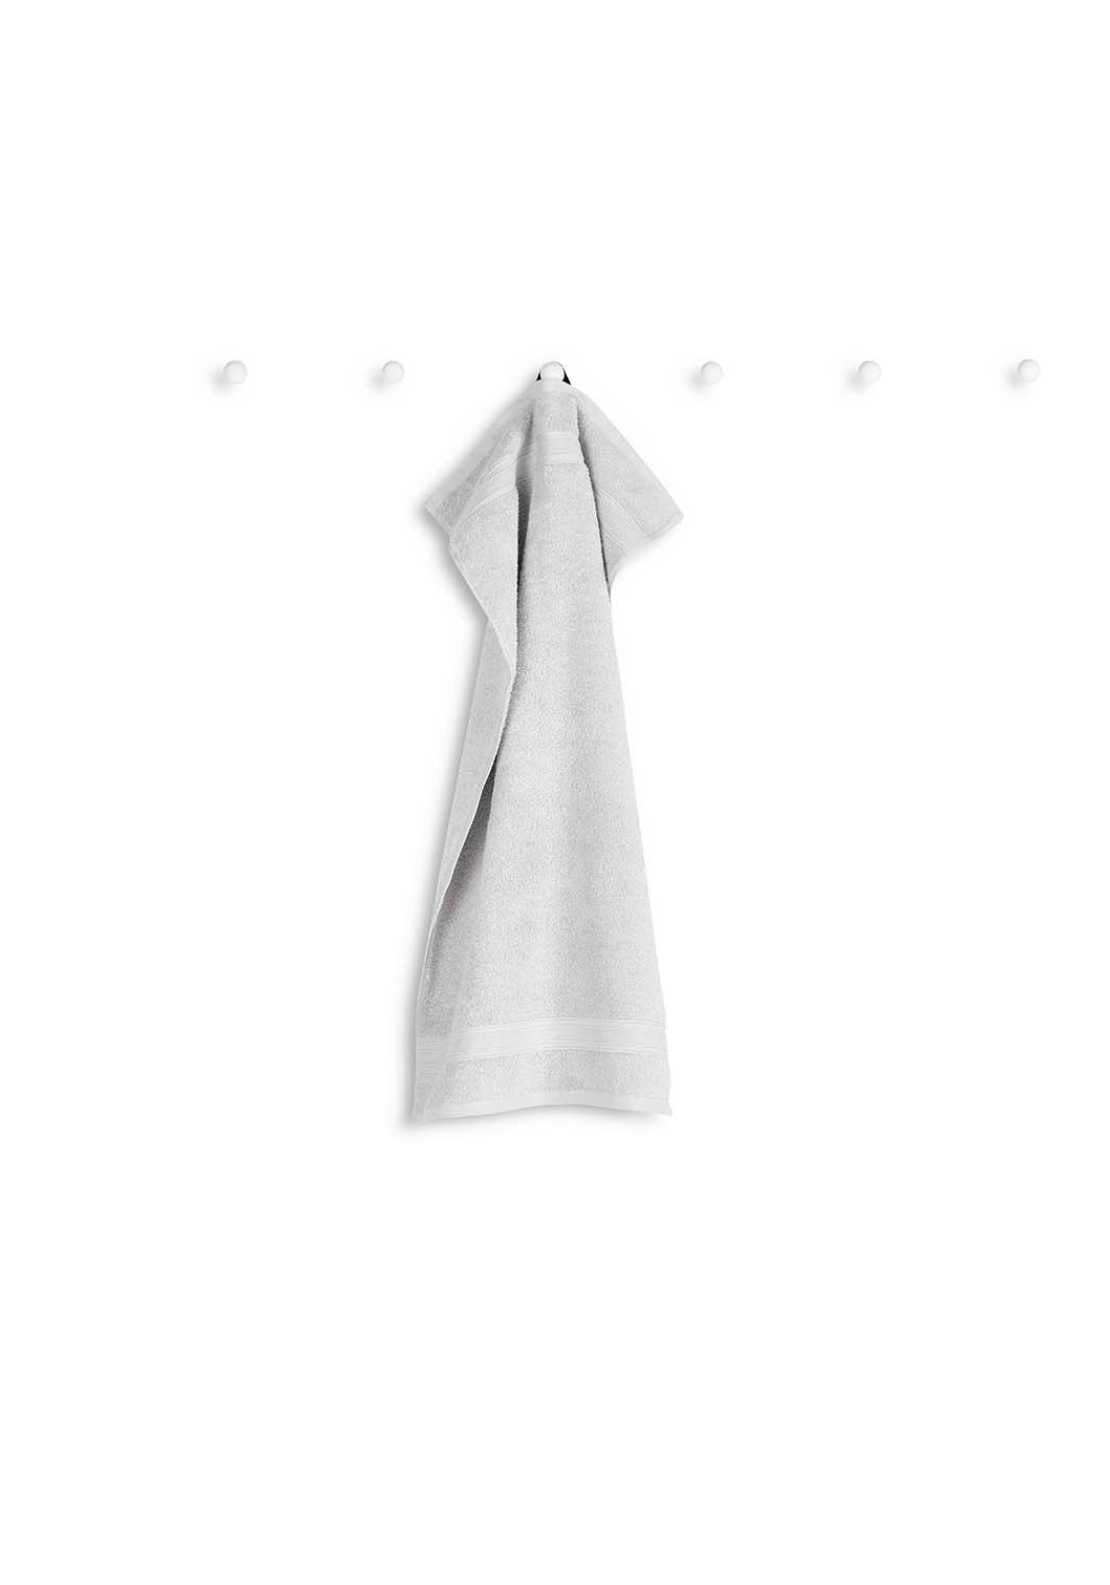 Christy Serene Hand Towel - White 2 Shaws Department Stores